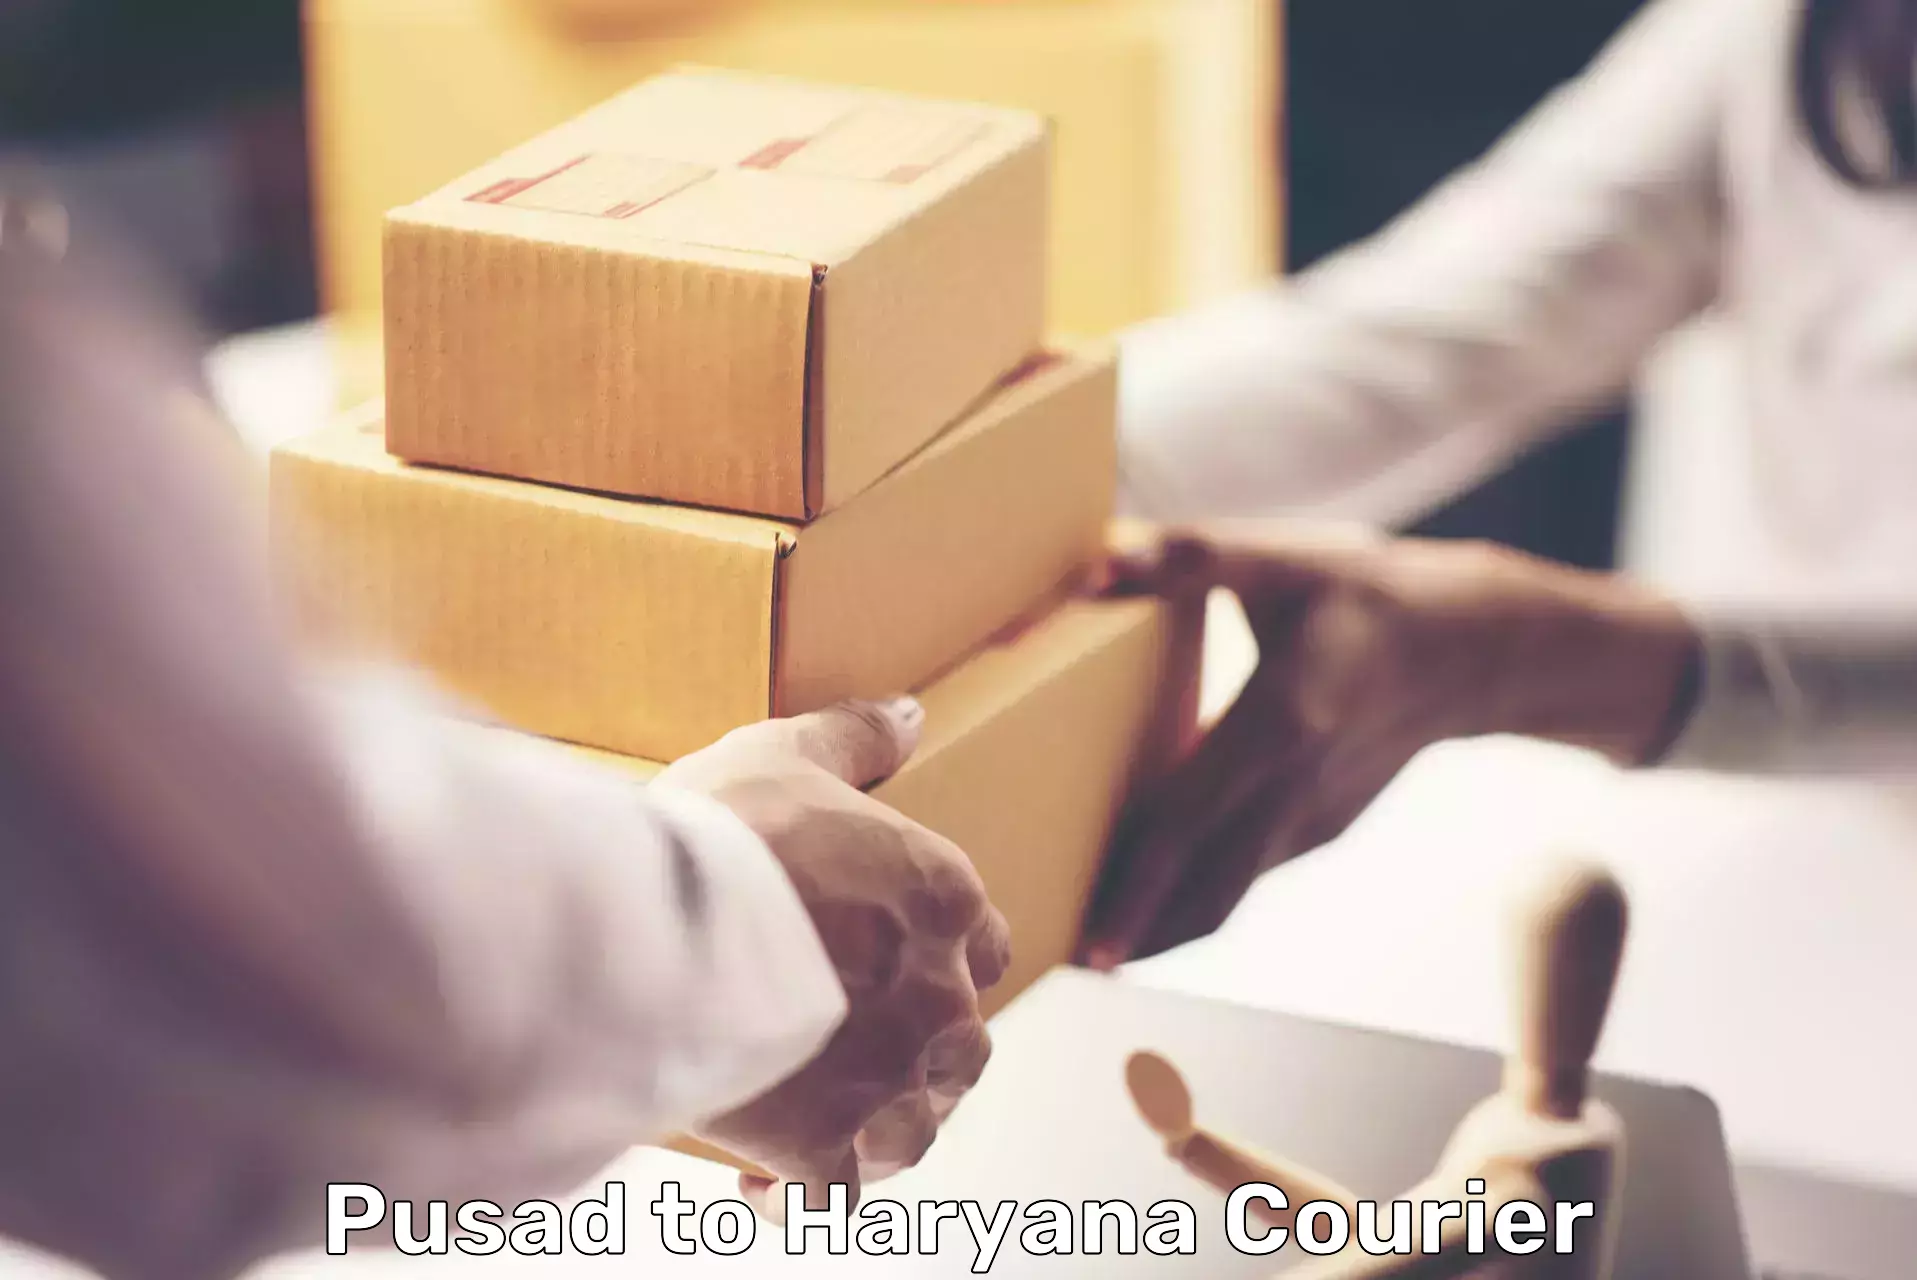 State-of-the-art courier technology Pusad to Rewari